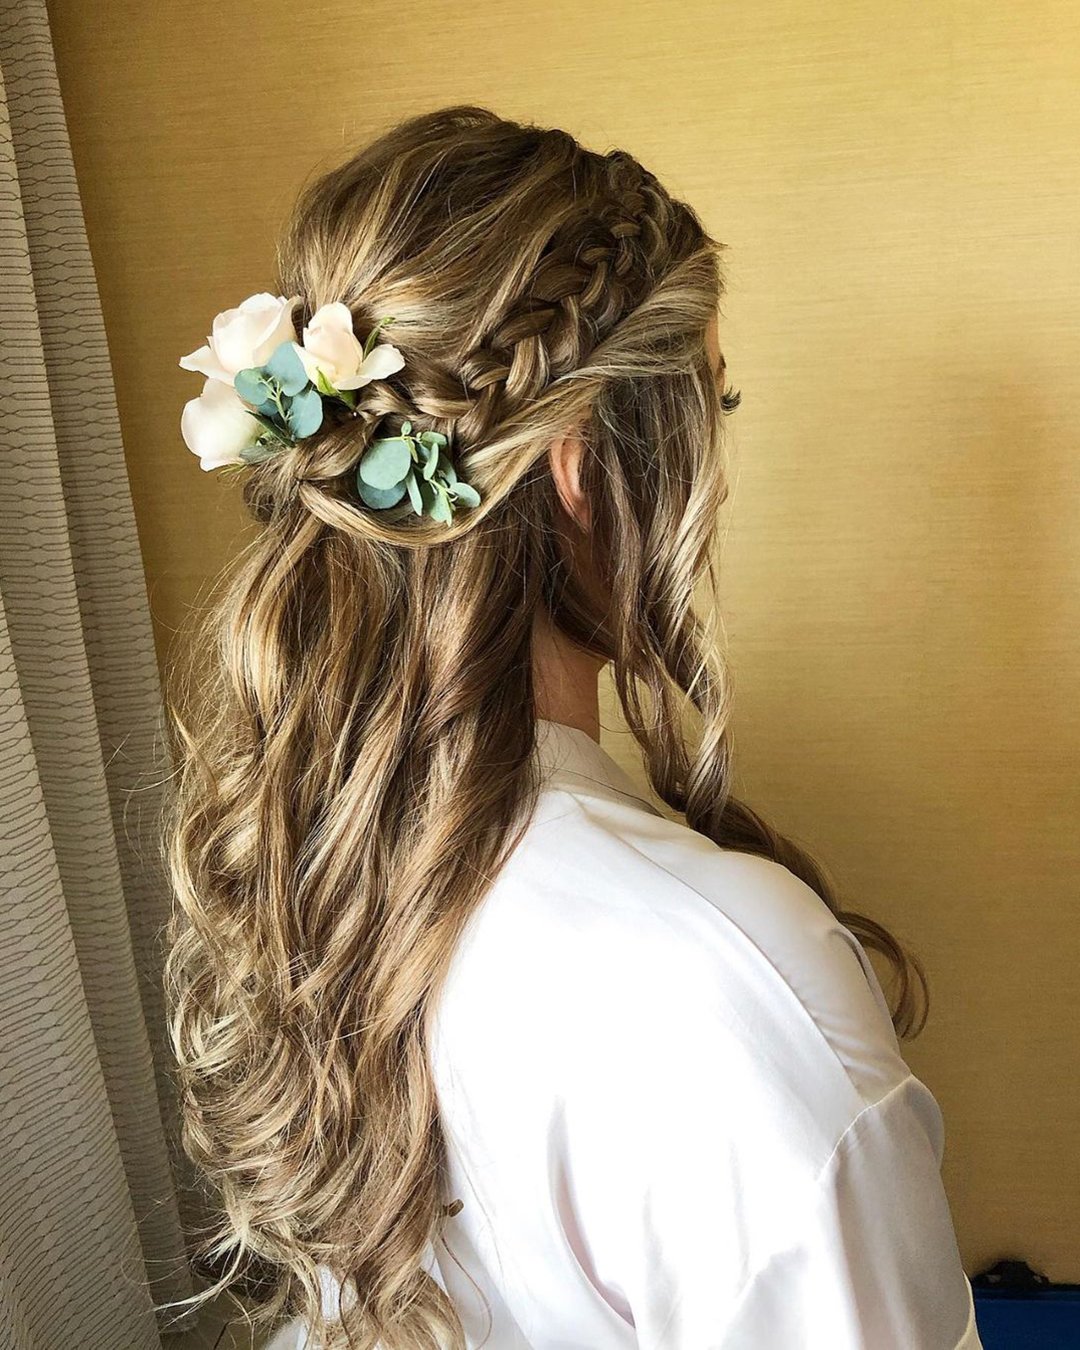 wedding hair accessories rustic bohemian half up with braids and flowers amyupdodesign